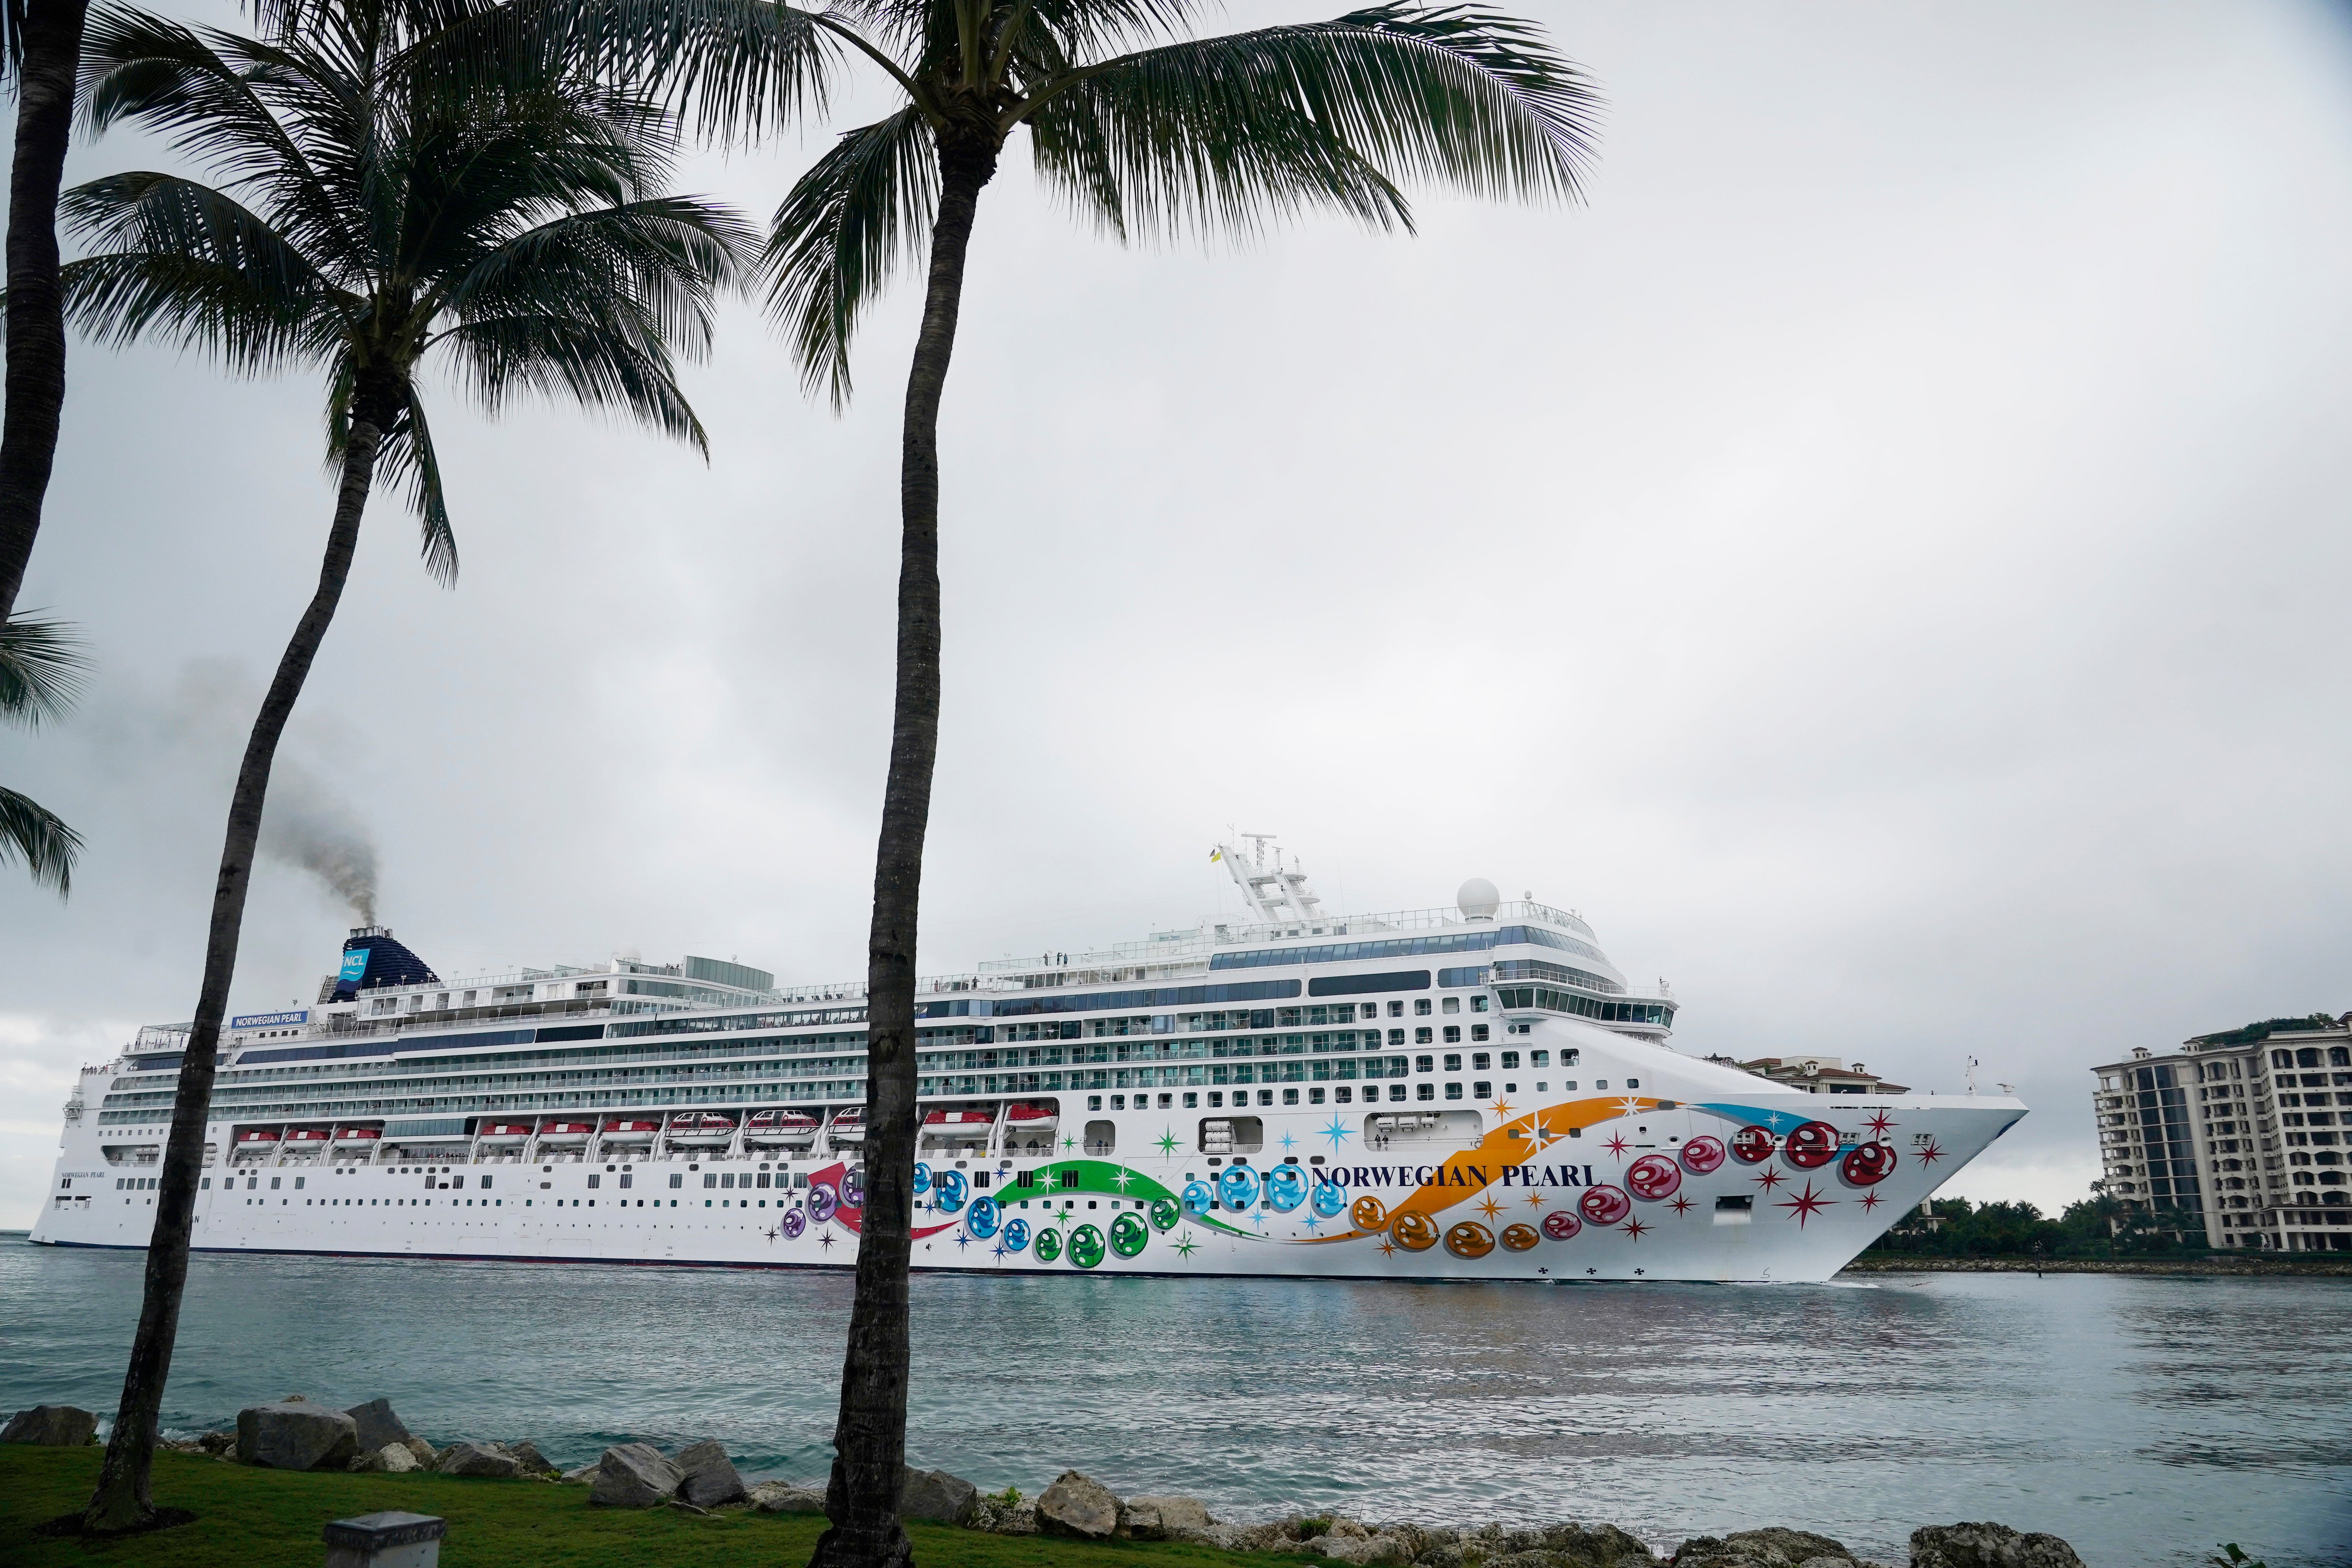 The Norwegian Pearl curtailed its sailing